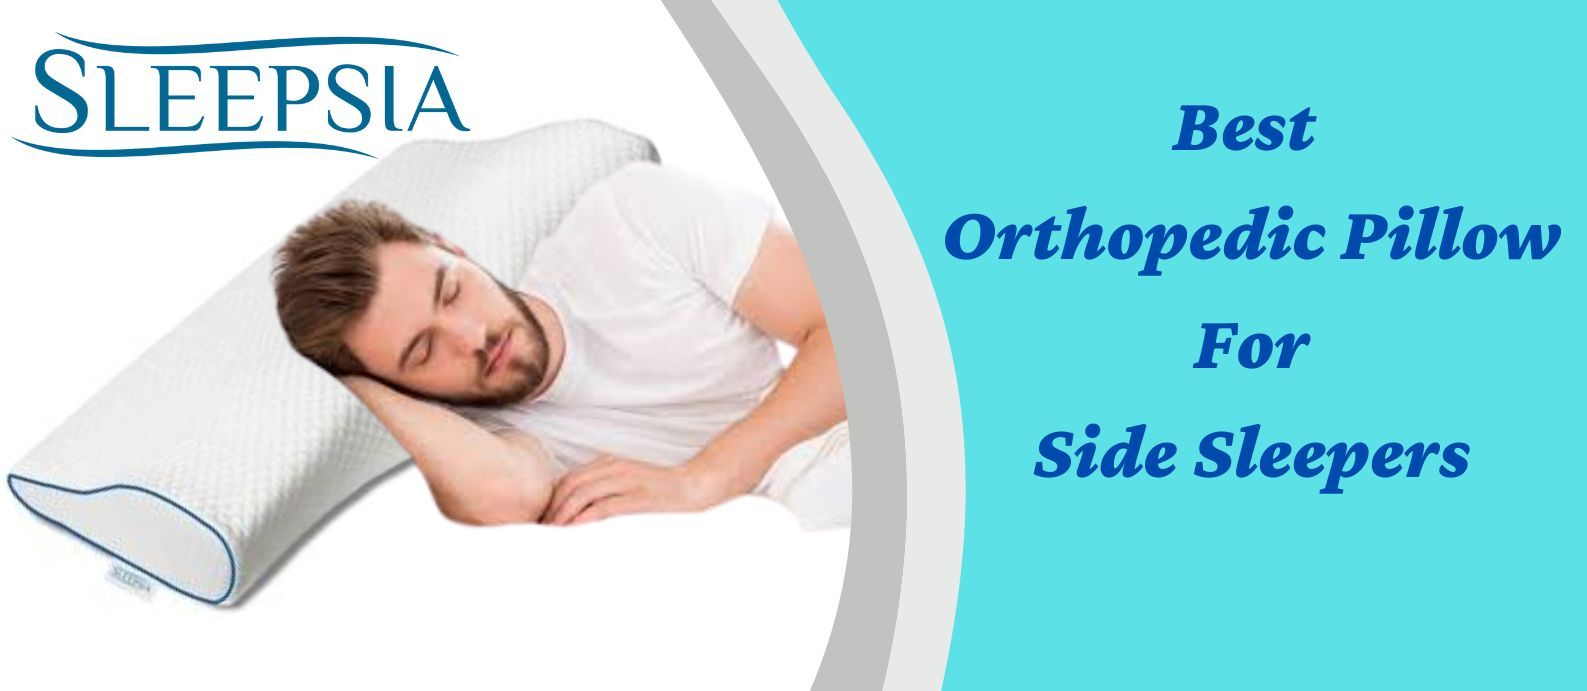 2023 – The Best Orthopedic Pillow For Side Sleepers